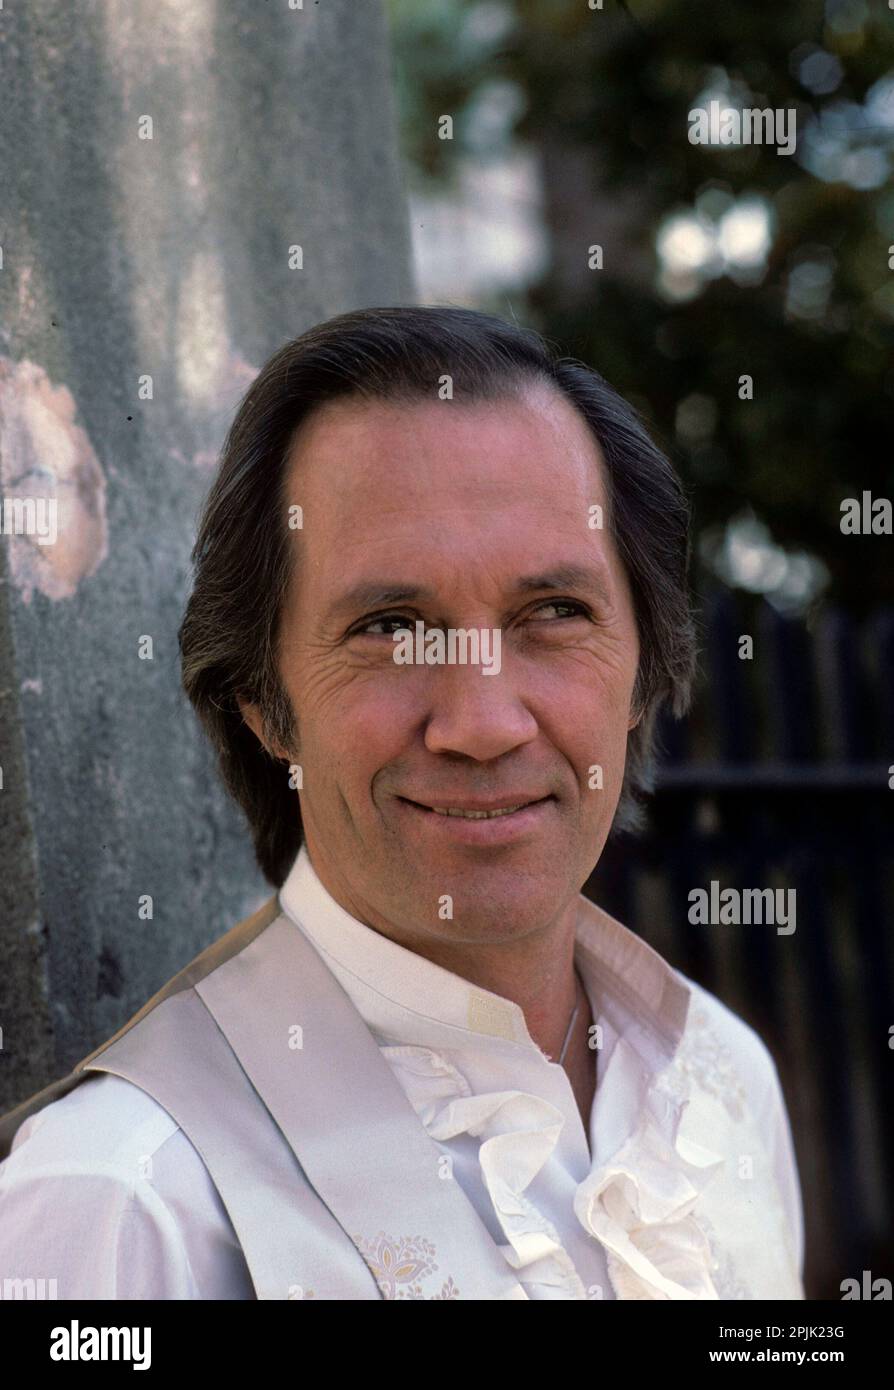 DAVID CARRADINE in NORTH AND SOUTH (1985), directed by RICHARD T. HEFFRON. Credit: WARNER BROS. TELEVISION / Album Stock Photo